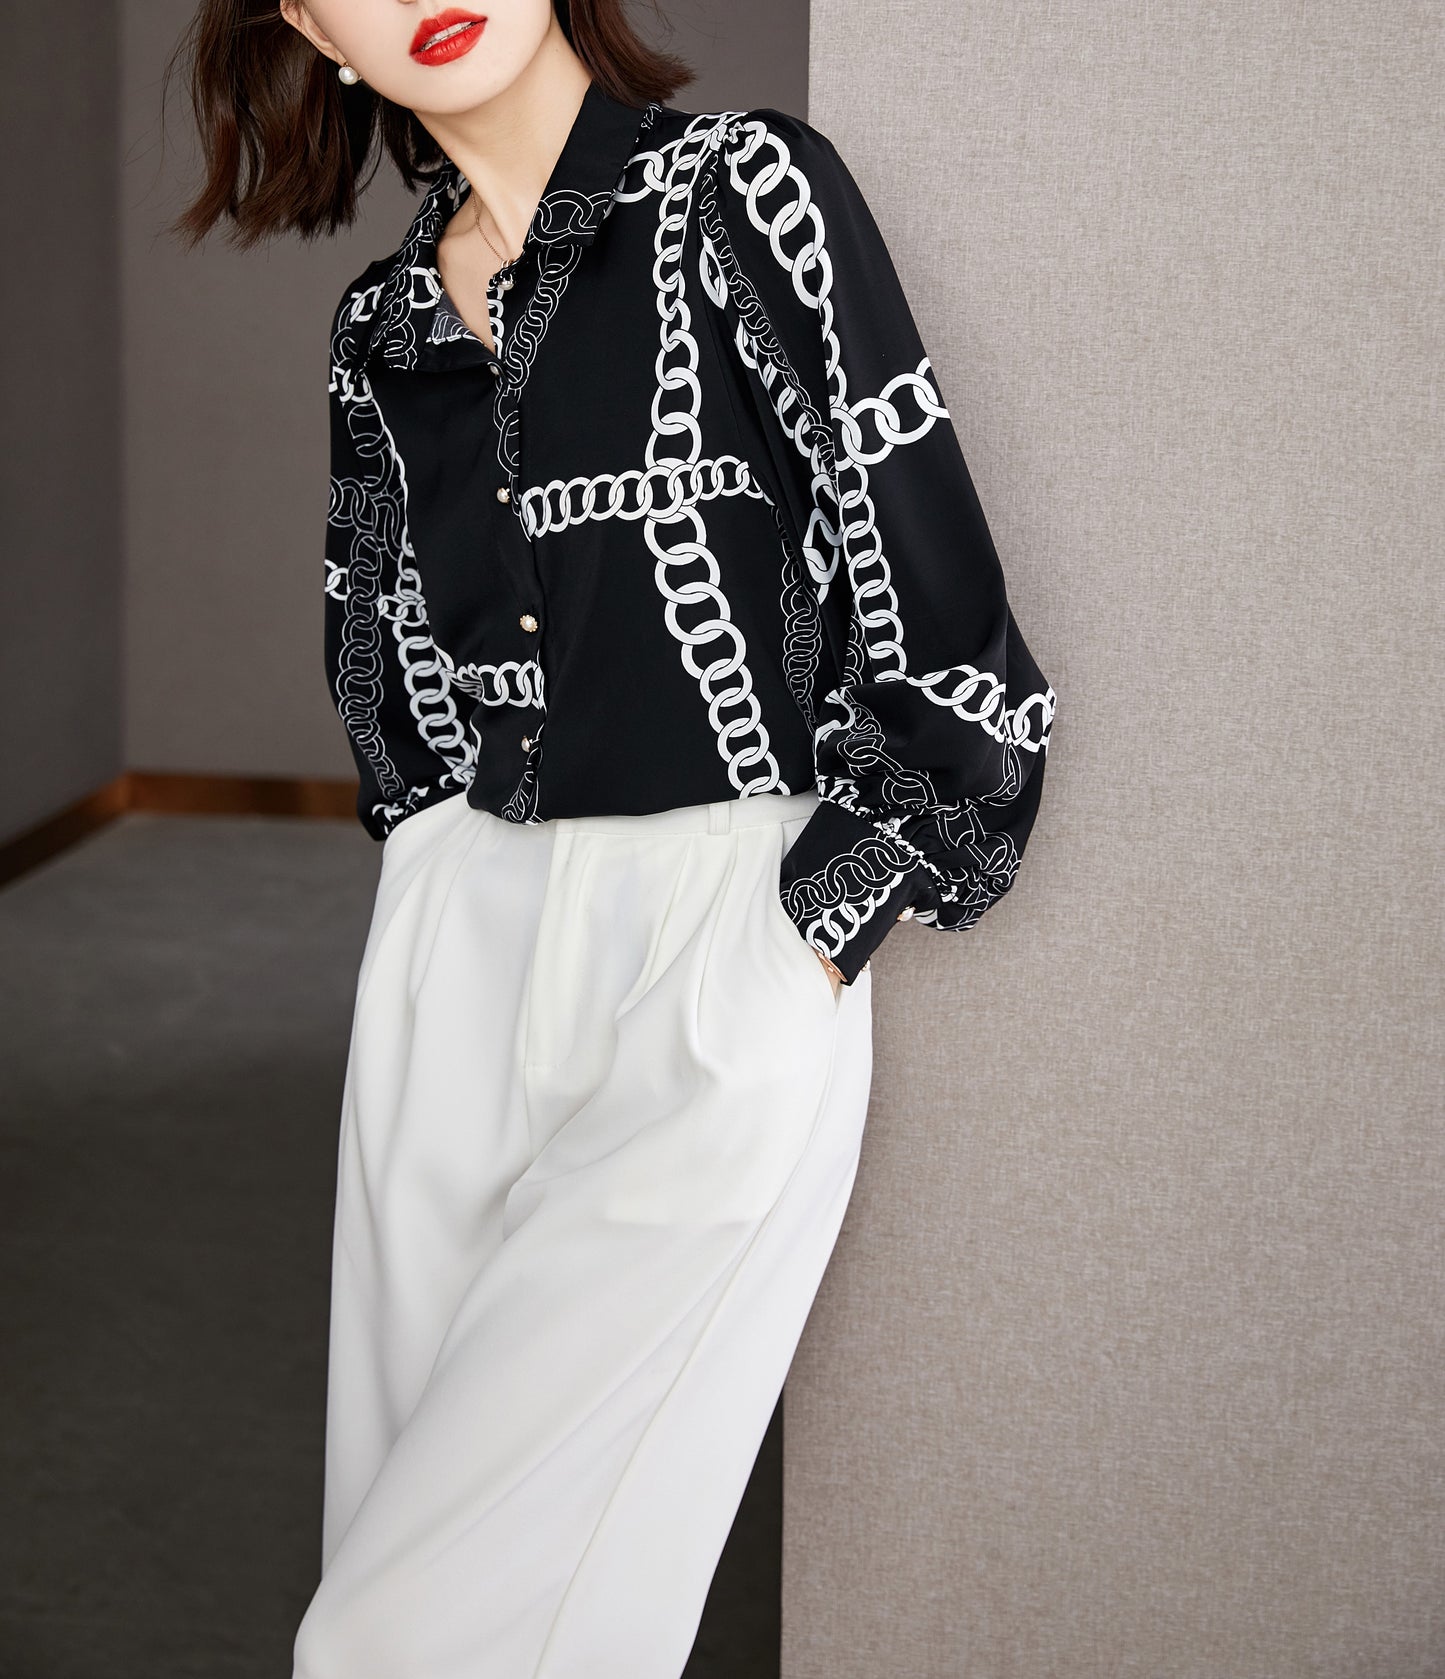 Black and White Long Sleeved Buttoned Chain Print Shirt